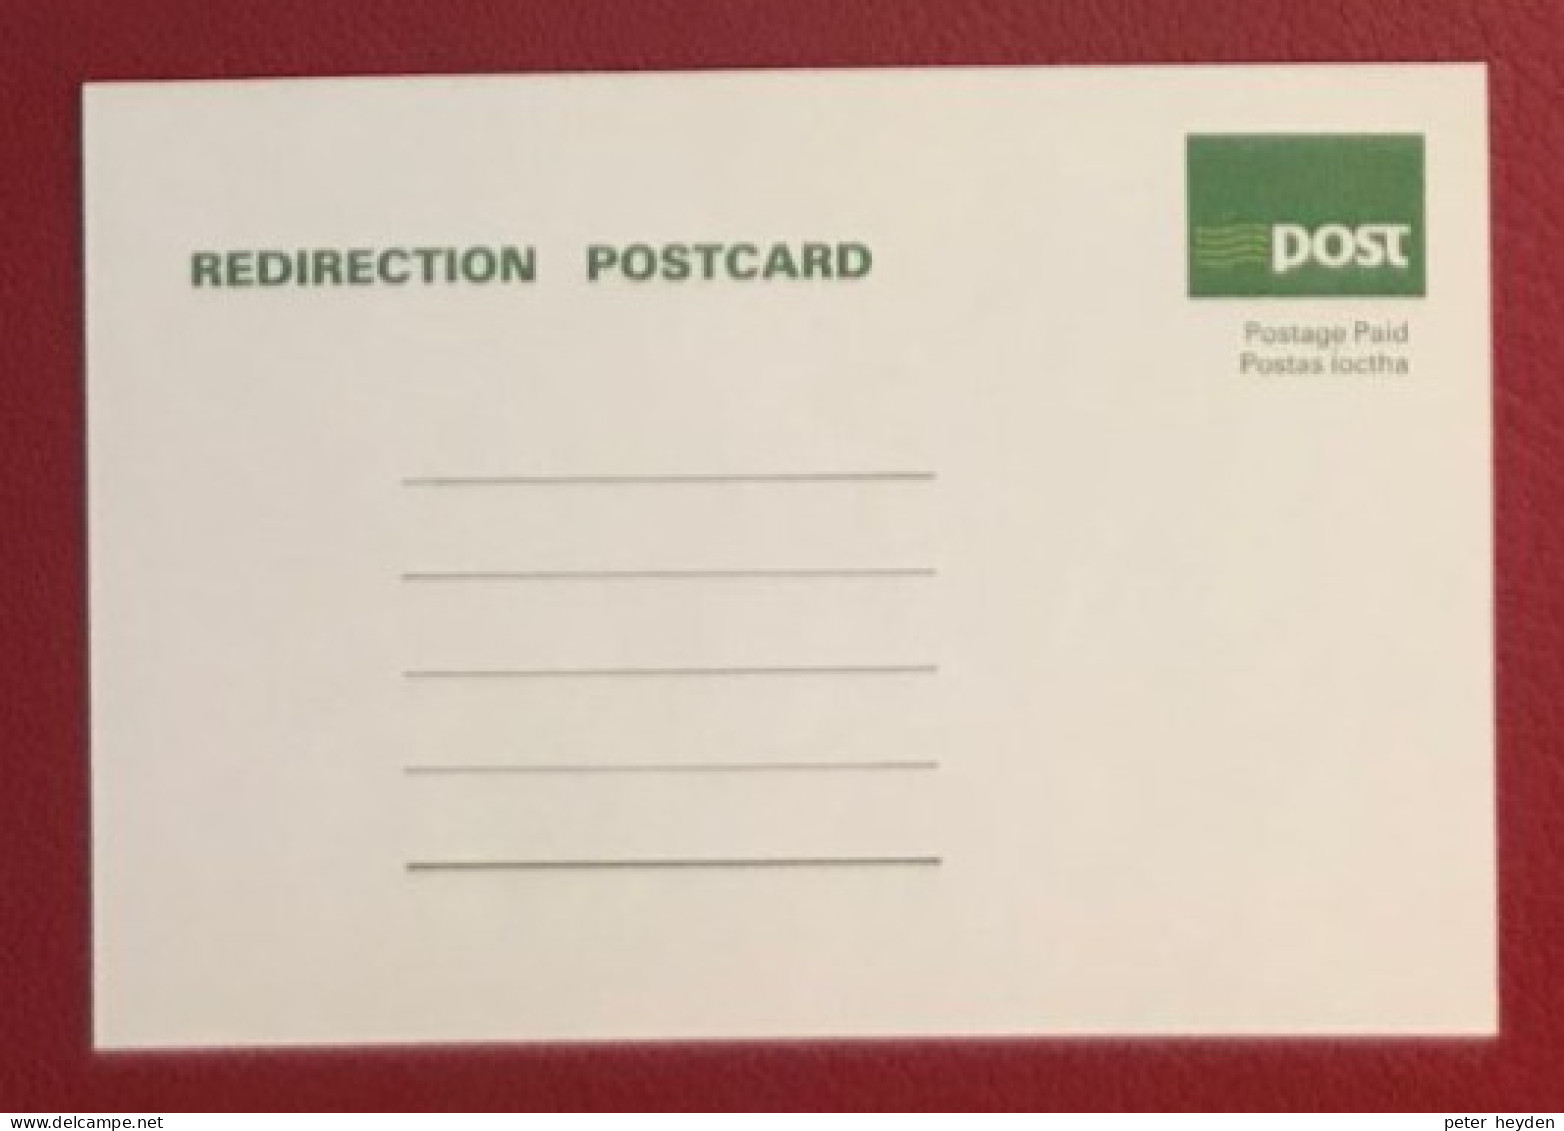 IRELAND 1986 Unused Redirection Postcard PP (25p) ~ MacDonnell Whyte PSM1 - Entiers Postaux